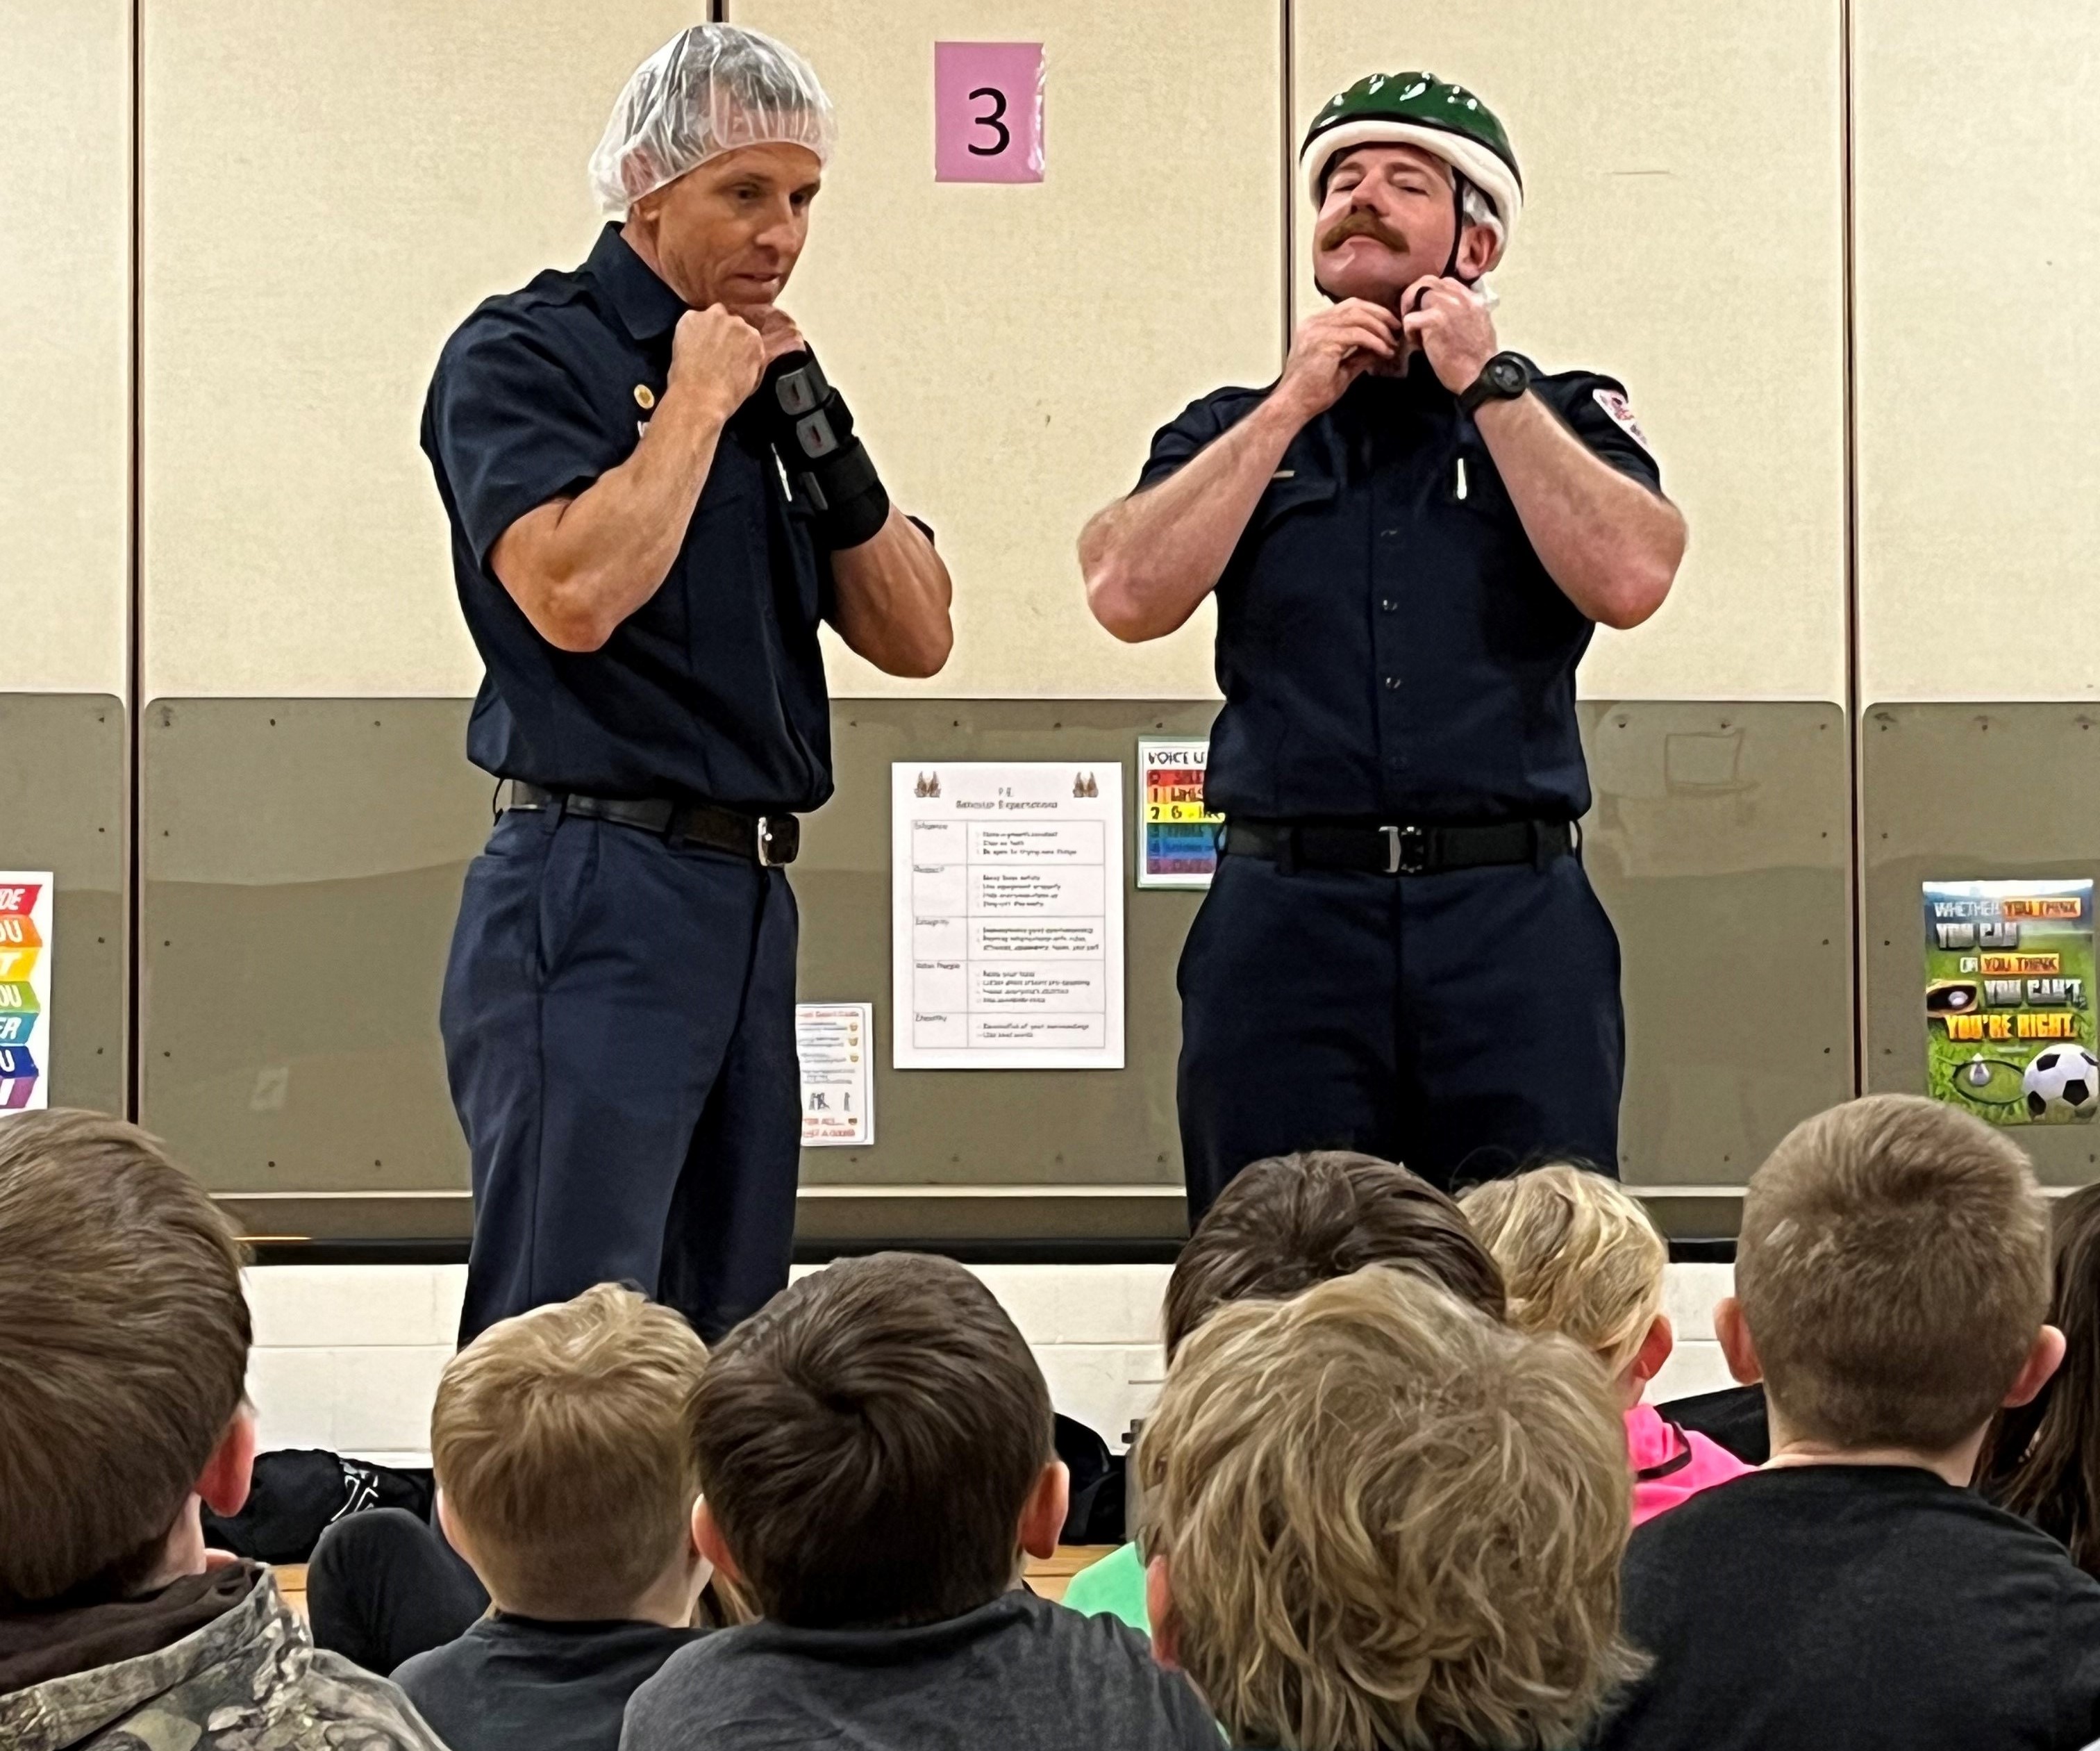 firefighters presenting on helmet safety